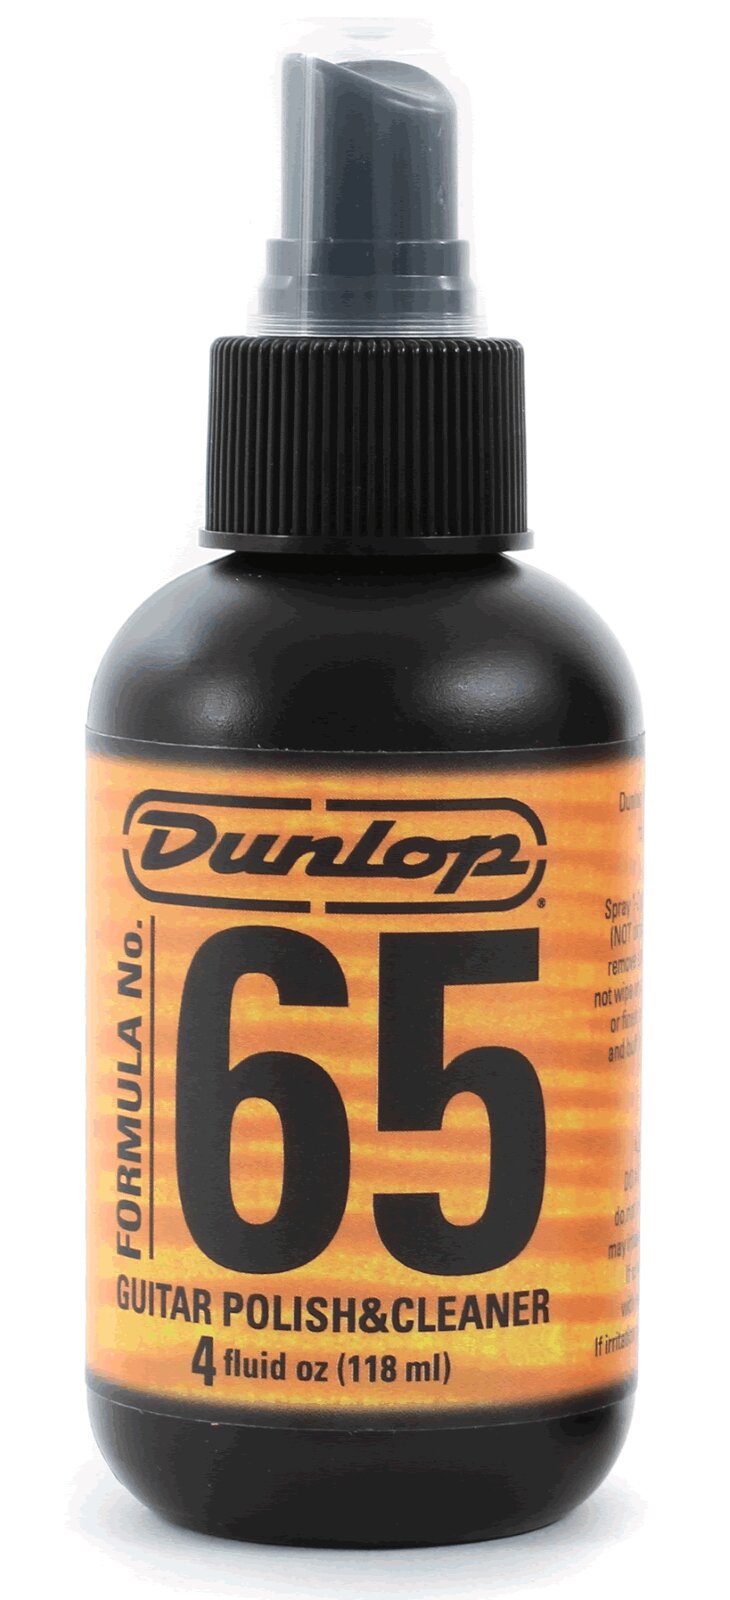 Dunlop Formula 65/654 Guitar polish and cleaner in spray 118ml : photo 1